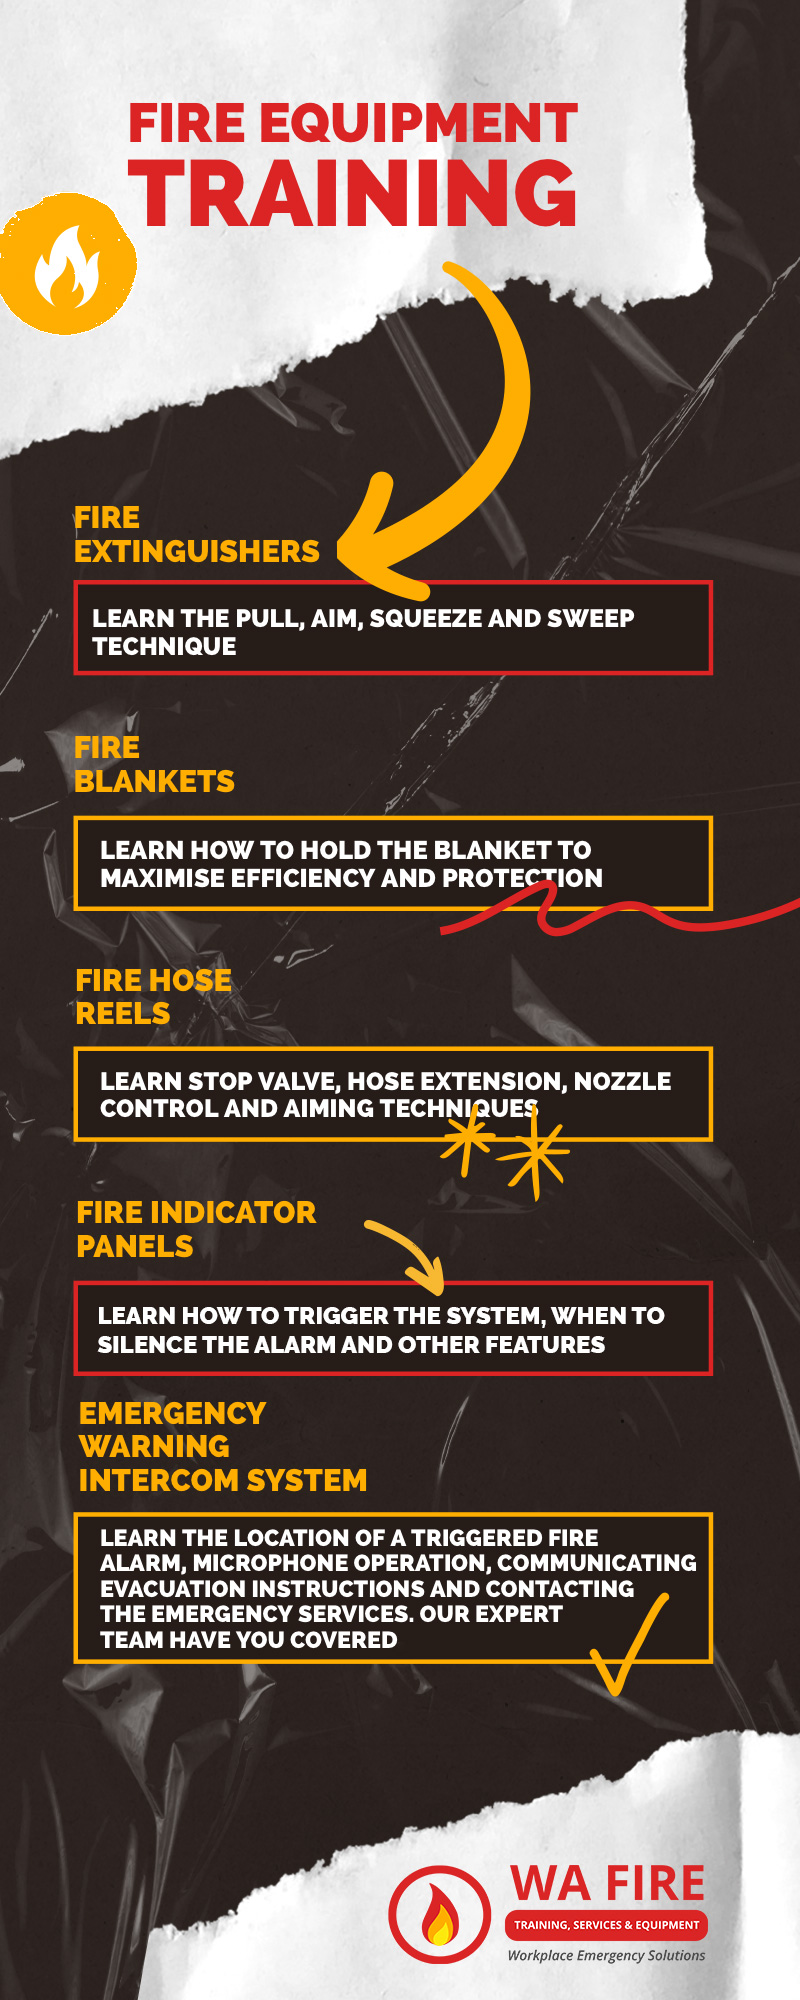 Fire equipment training - The tools and techniques